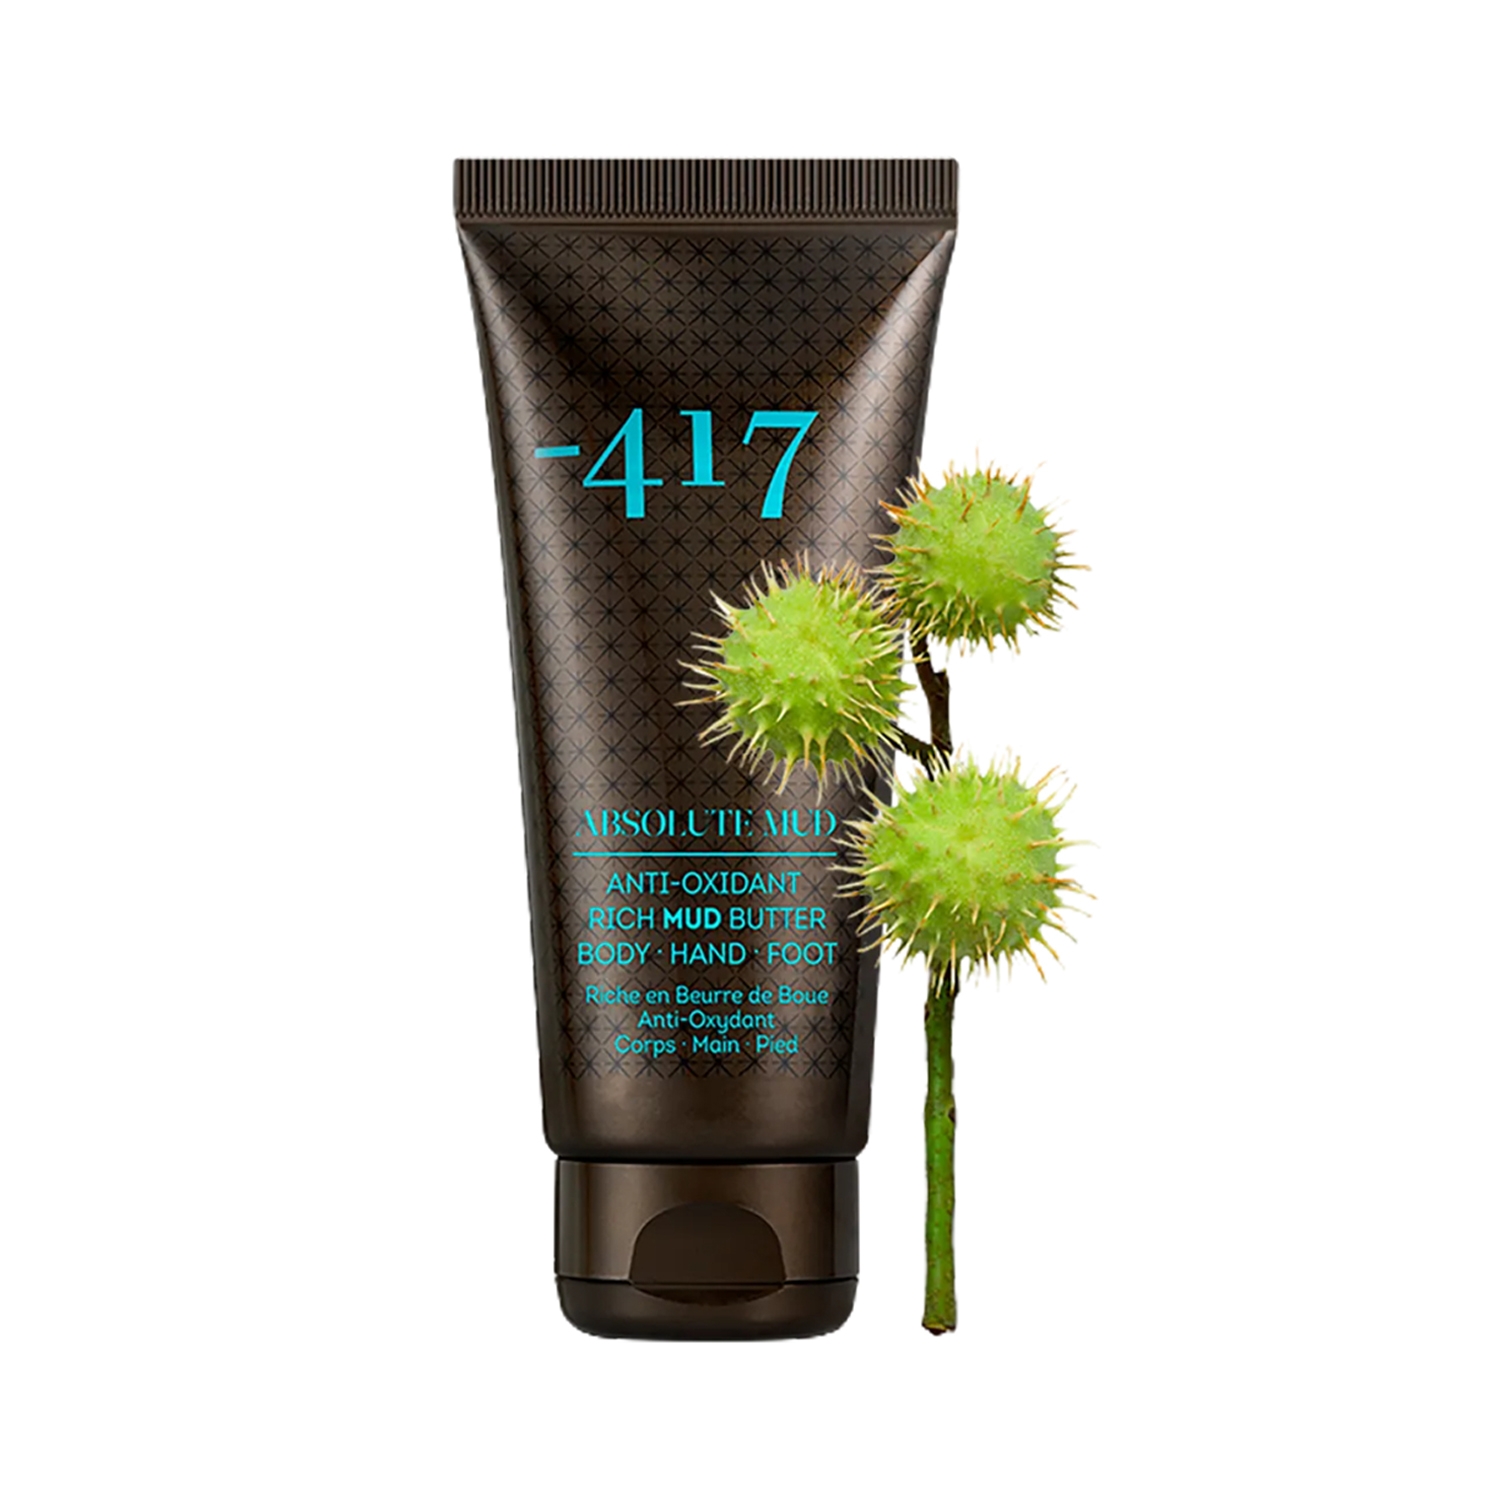 Minus 417 | Minus 417 Absolute Mud Antioxidant Rich Mud Hand And Foot Body Butter (100ml)